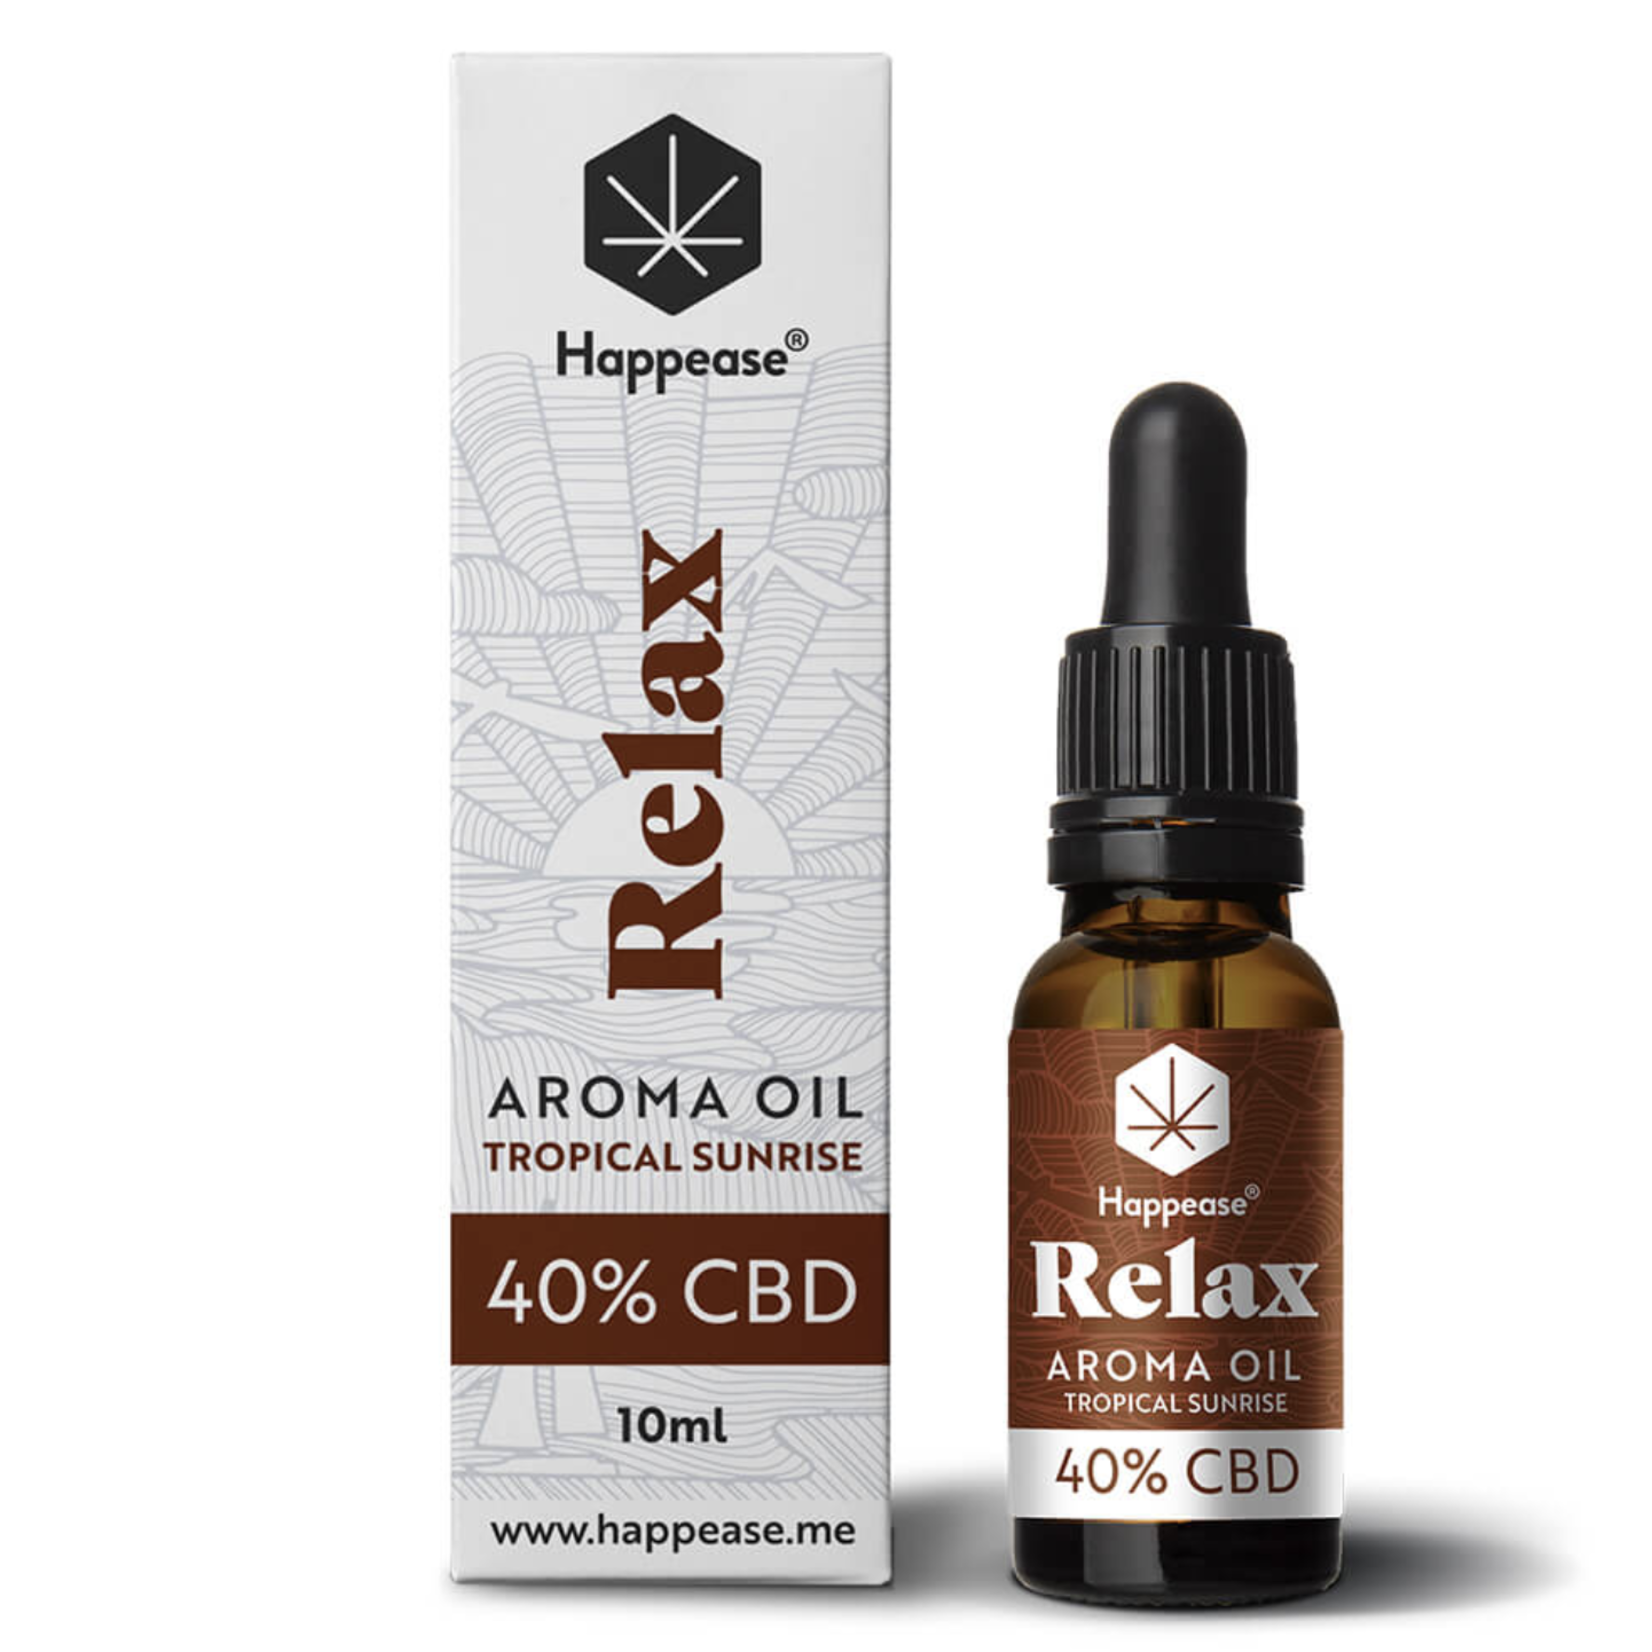 Happease Happease CBD Oil "RELAX" Strawberry Field 40%